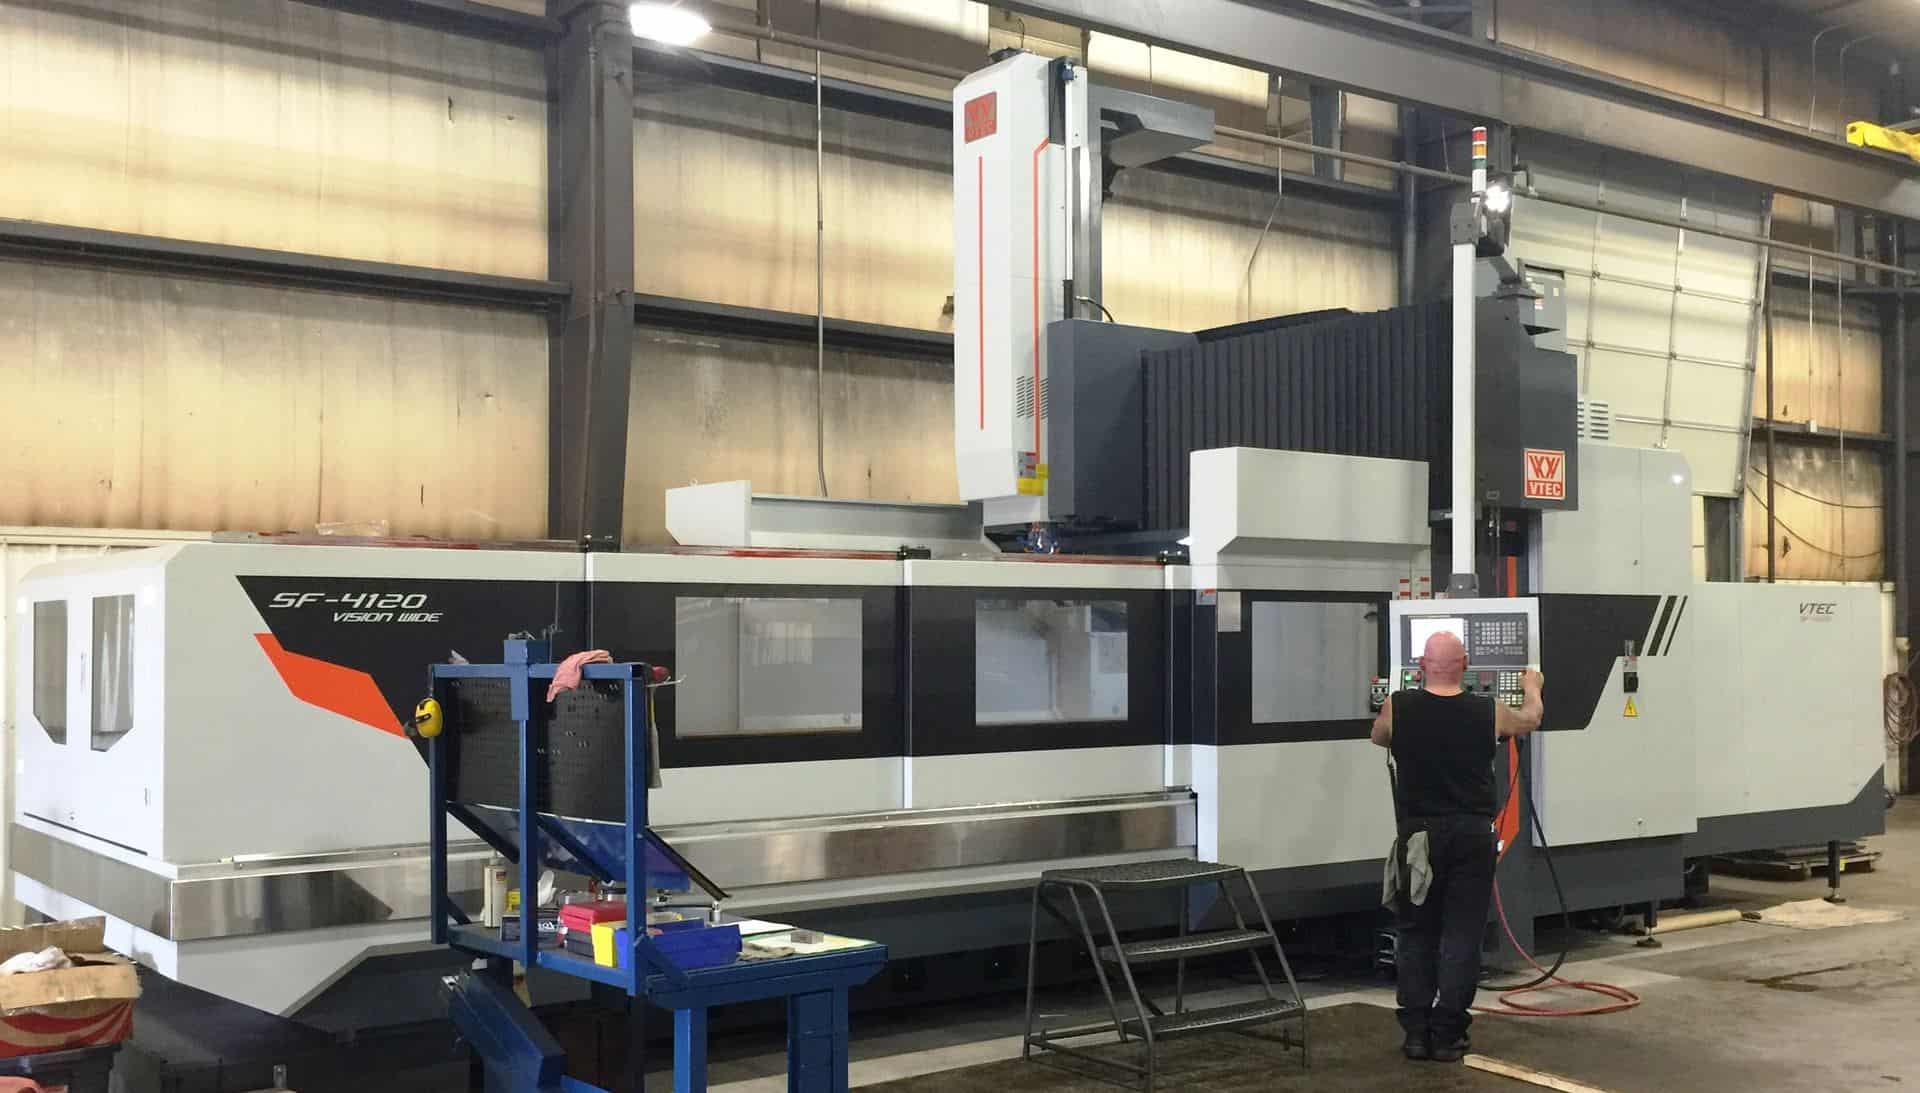 New VMC Expands Capacity To Machine Large Components And Weldments